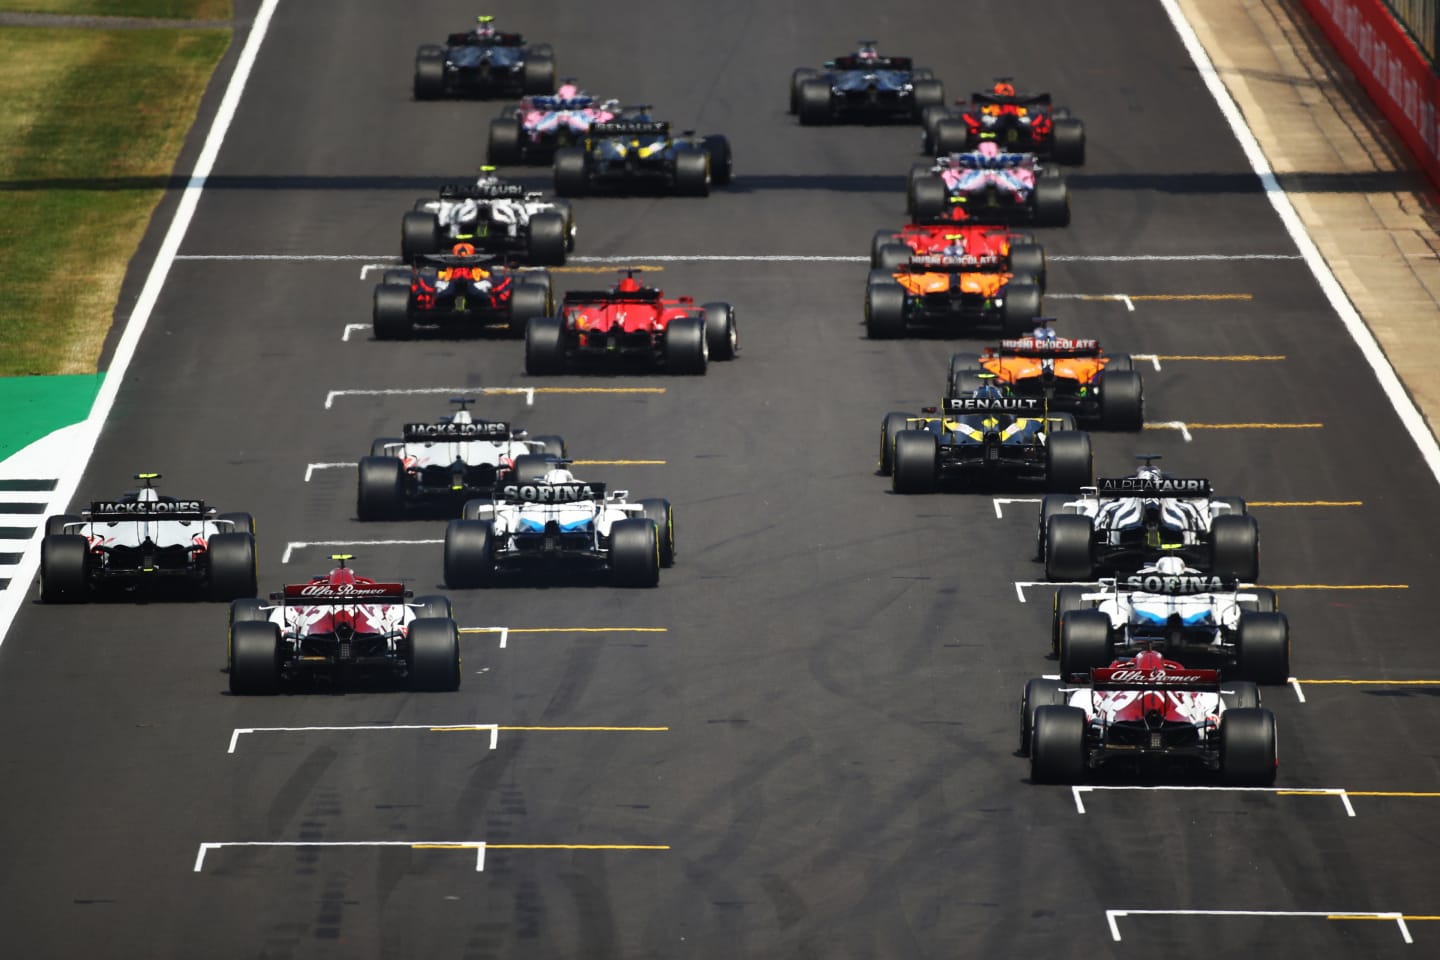 NORTHAMPTON, ENGLAND - AUGUST 09: A general view of the grid at the start of the race during the F1